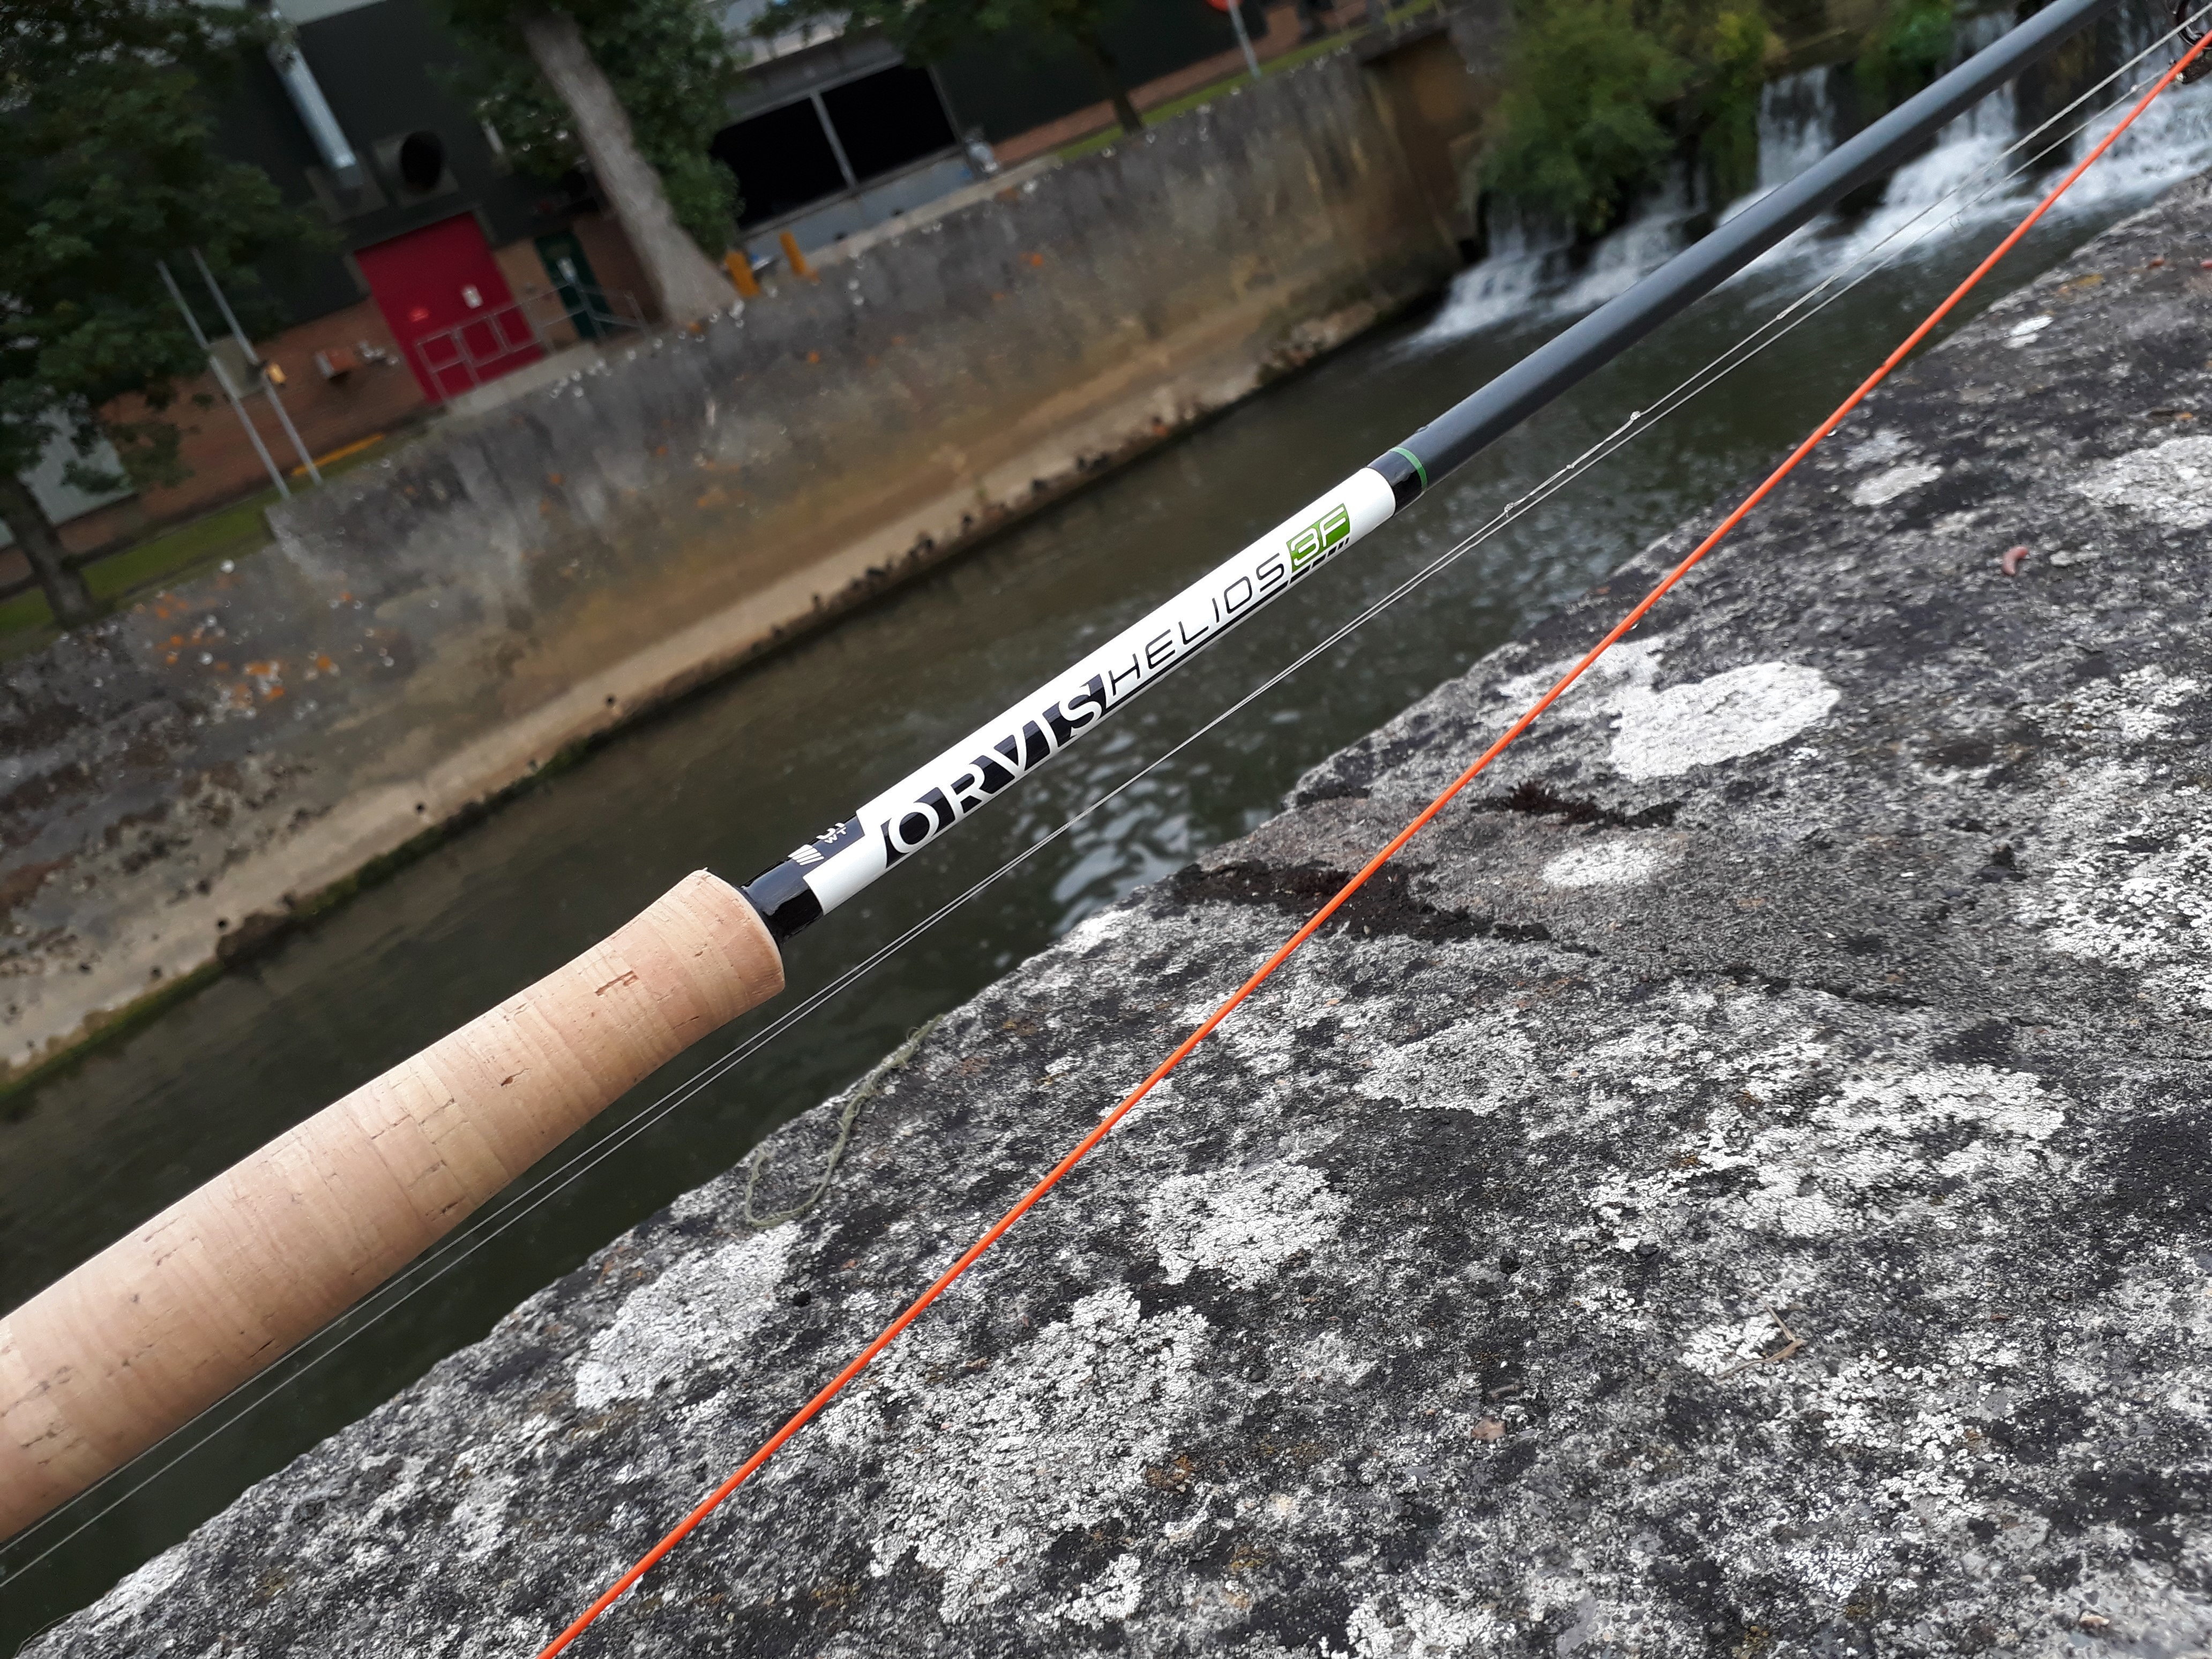 » Unicorns and other streamer rods: Reviewing the